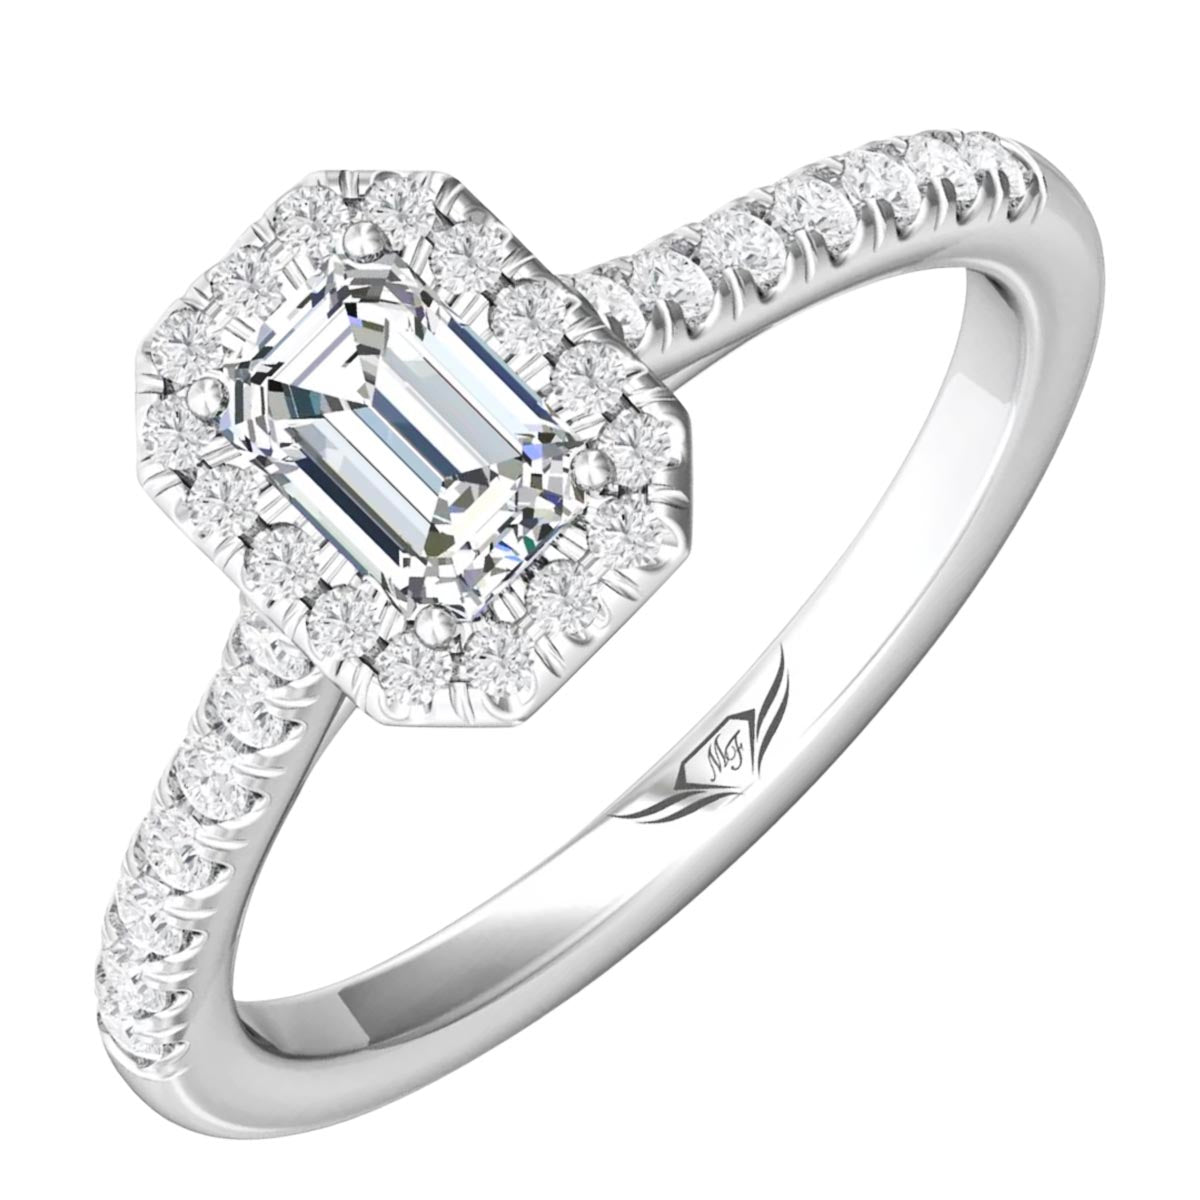 Emerald Cut Diamond Halo Engagement Ring in 14kt White Gold (1ct tw)